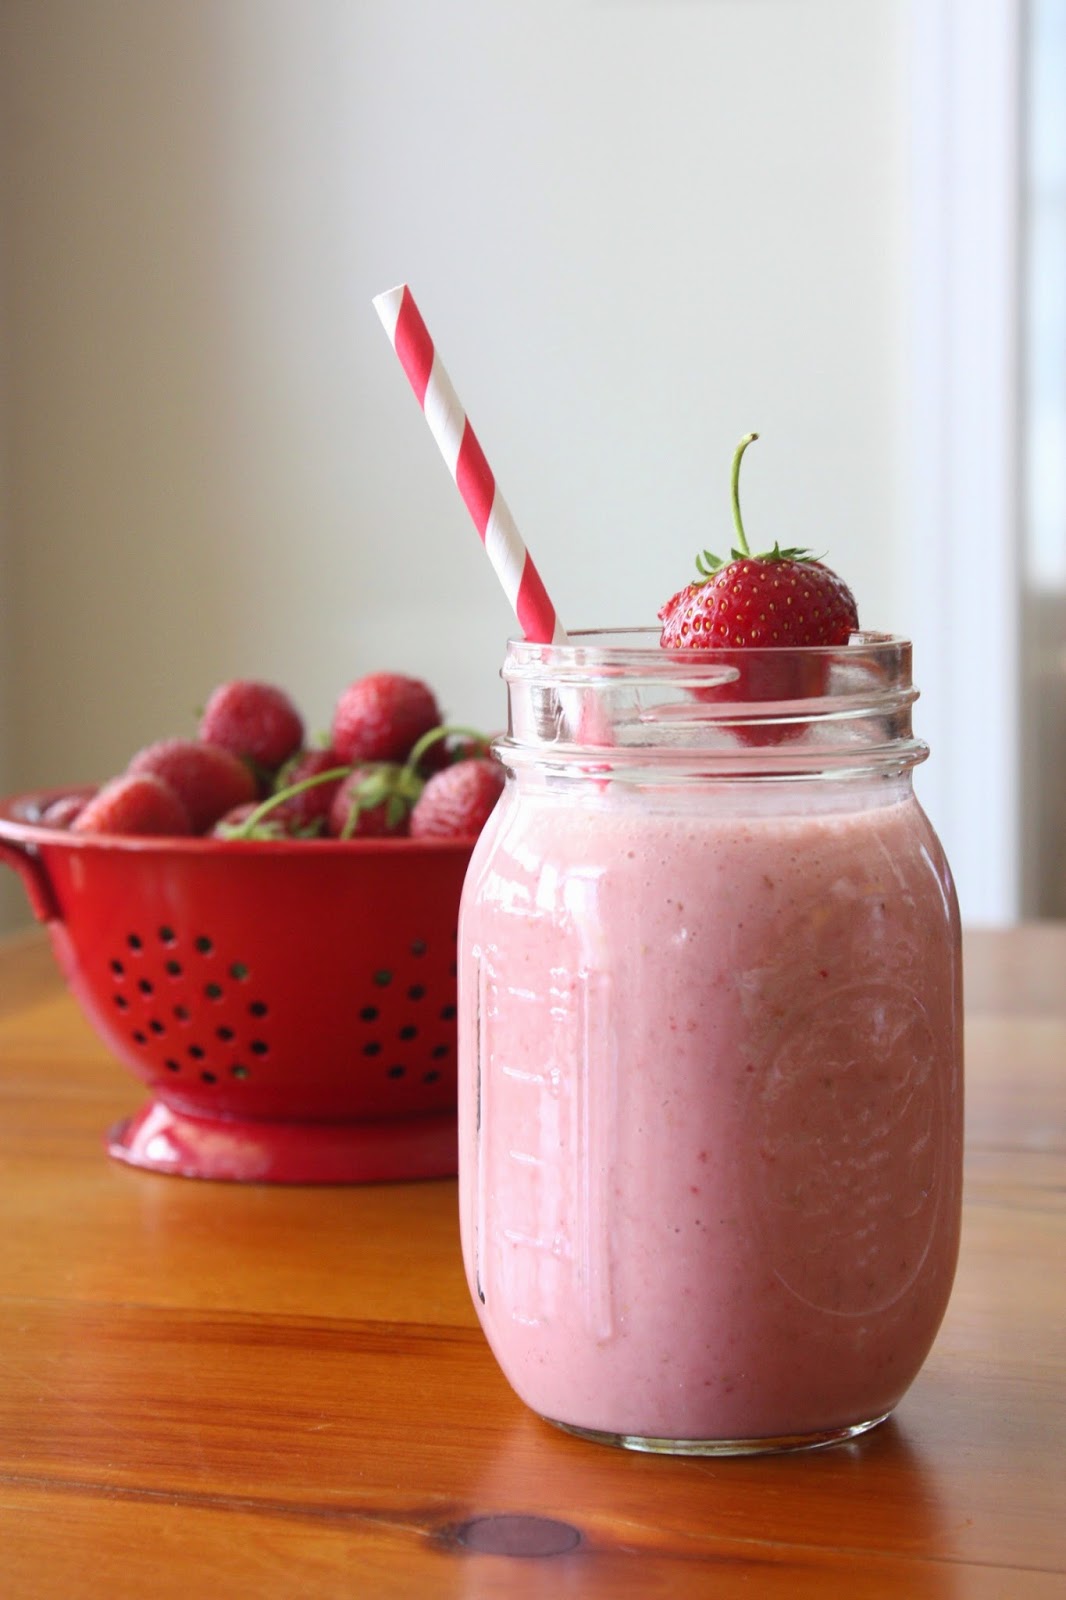 All About Women&amp;#39;s Things: Pick A Healthy Strawberry Smoothie Recipe